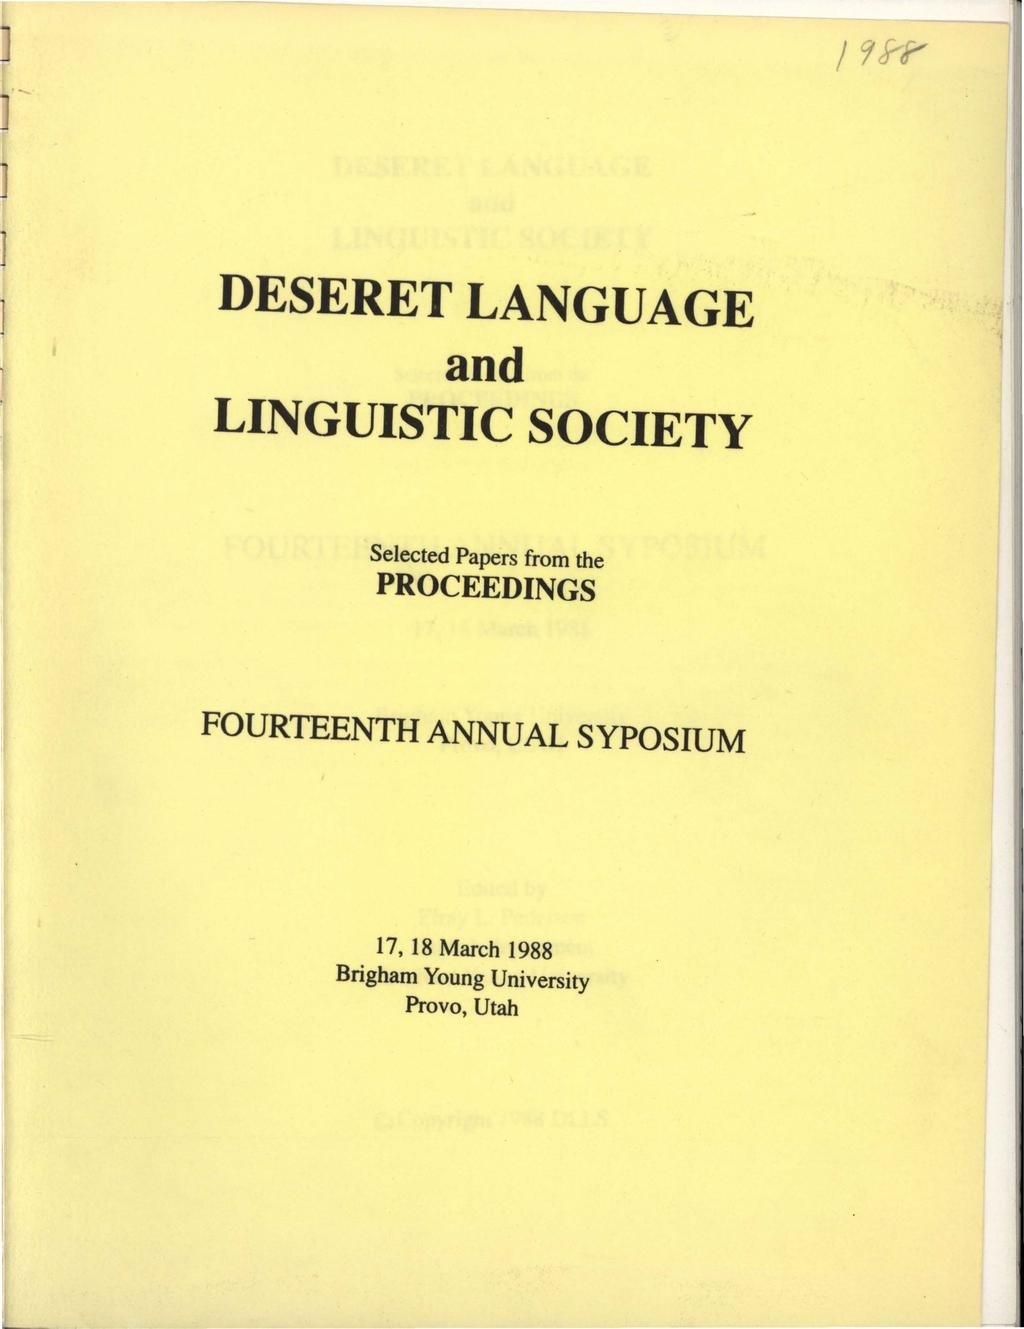 DESERET LANGUAGE and LINGUISTIC SOCIETY Selected Papers from the PROCEEDINGS